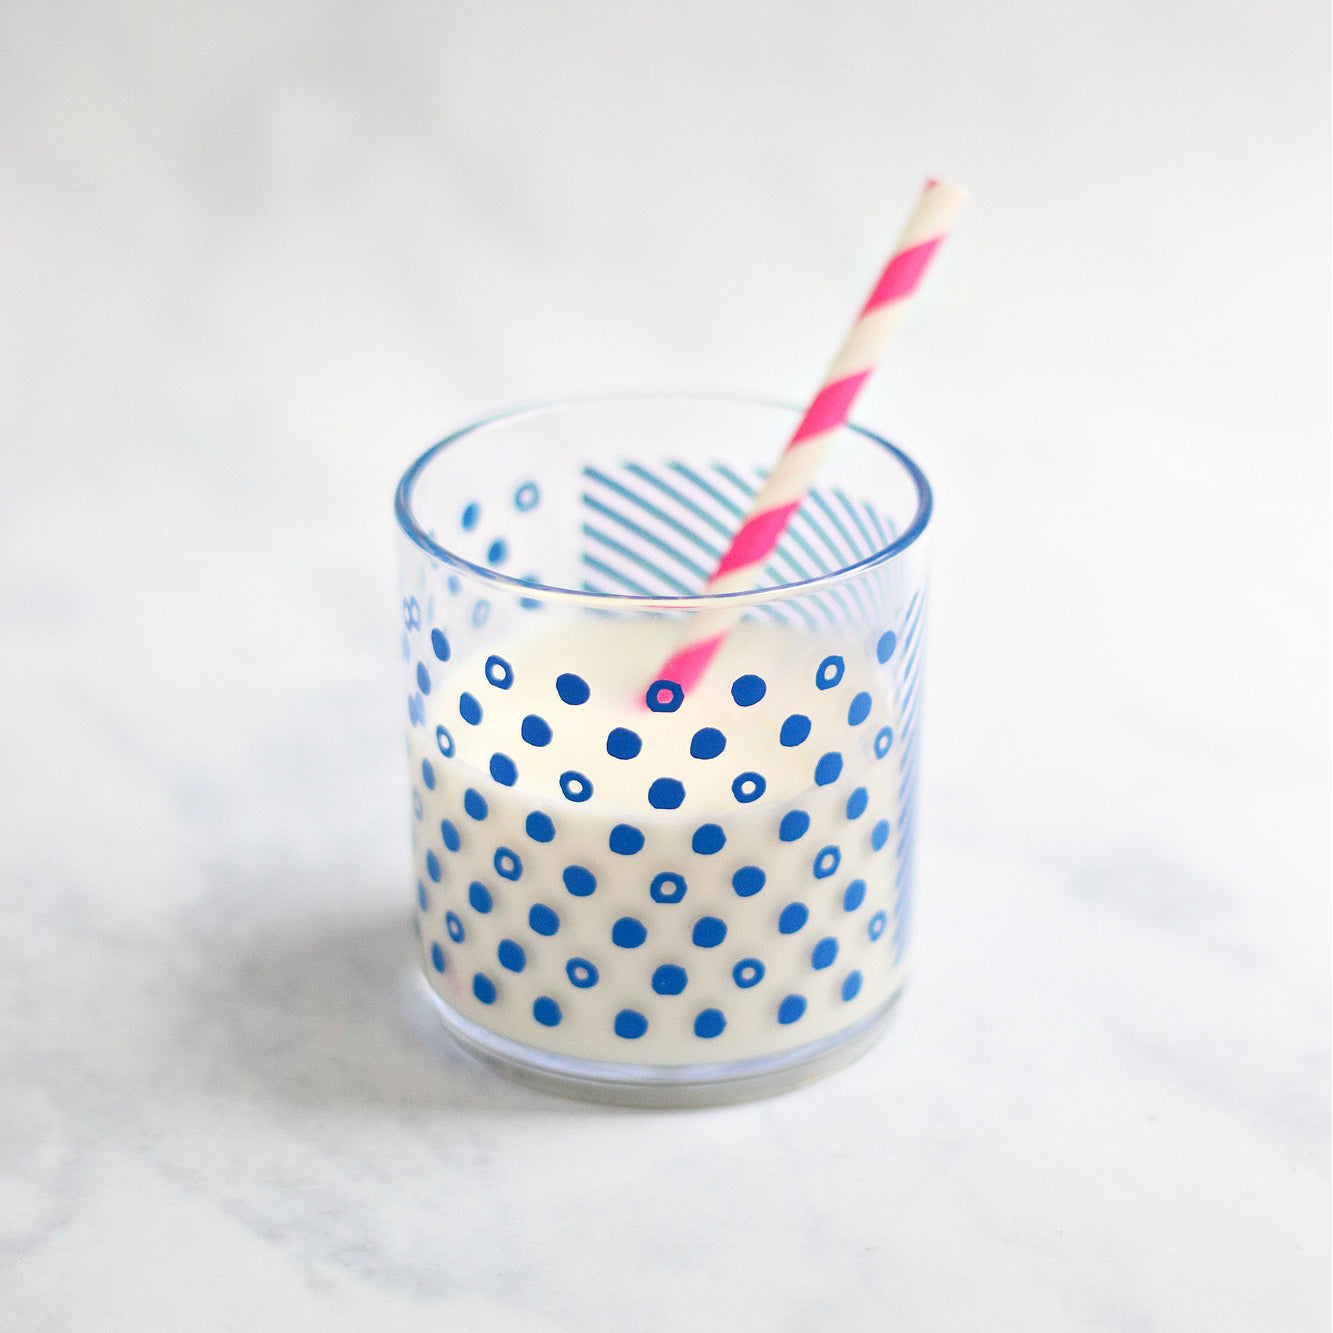 The classic tumber filled with milk and a pink and white striped straw.